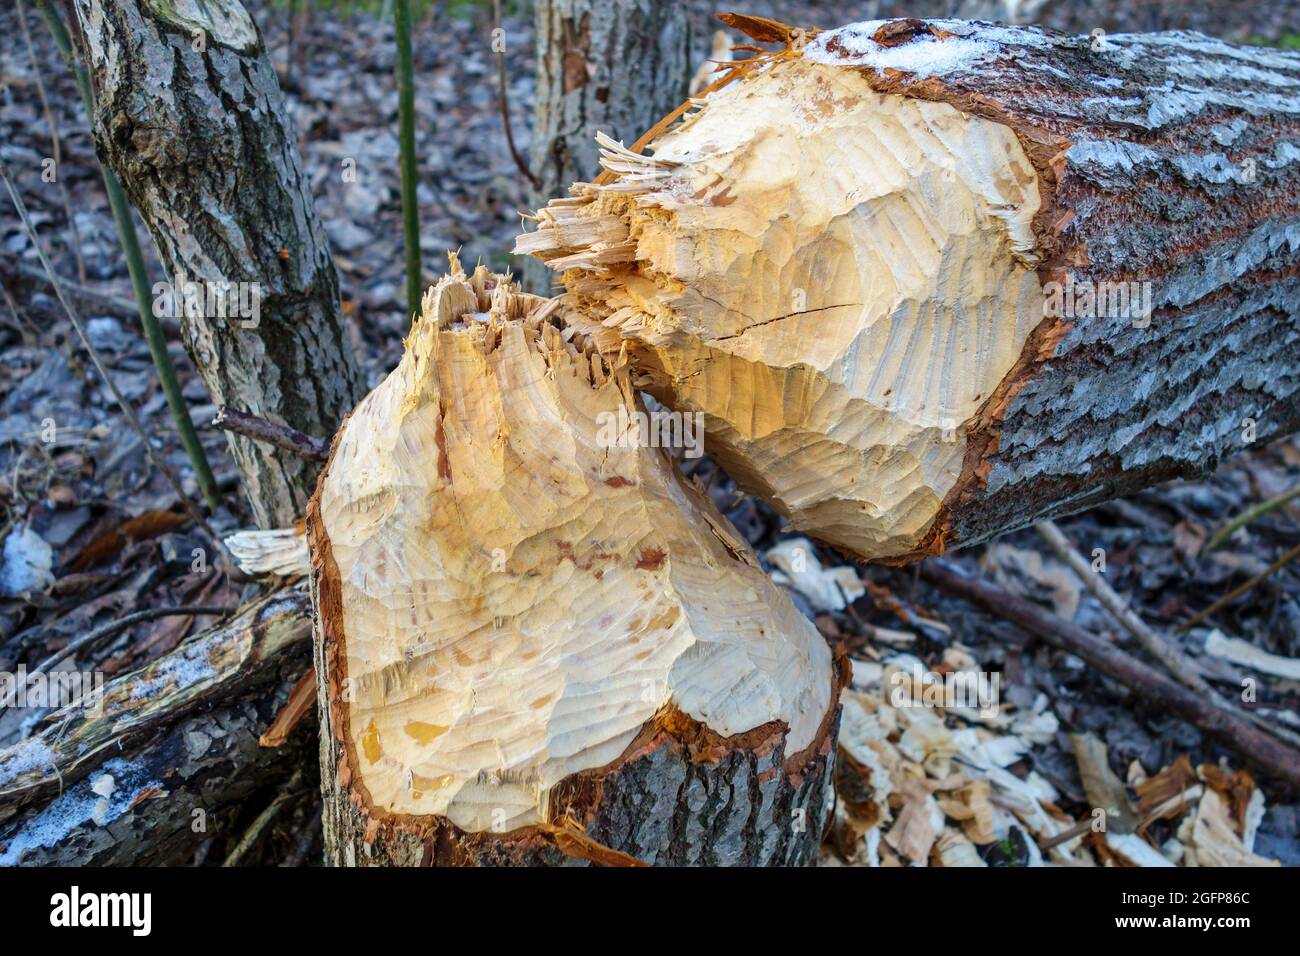 The beavers gnawed at the trunk of the tree, the tree fell. Beaver teeth markings are visible on the wood. Stock Photo